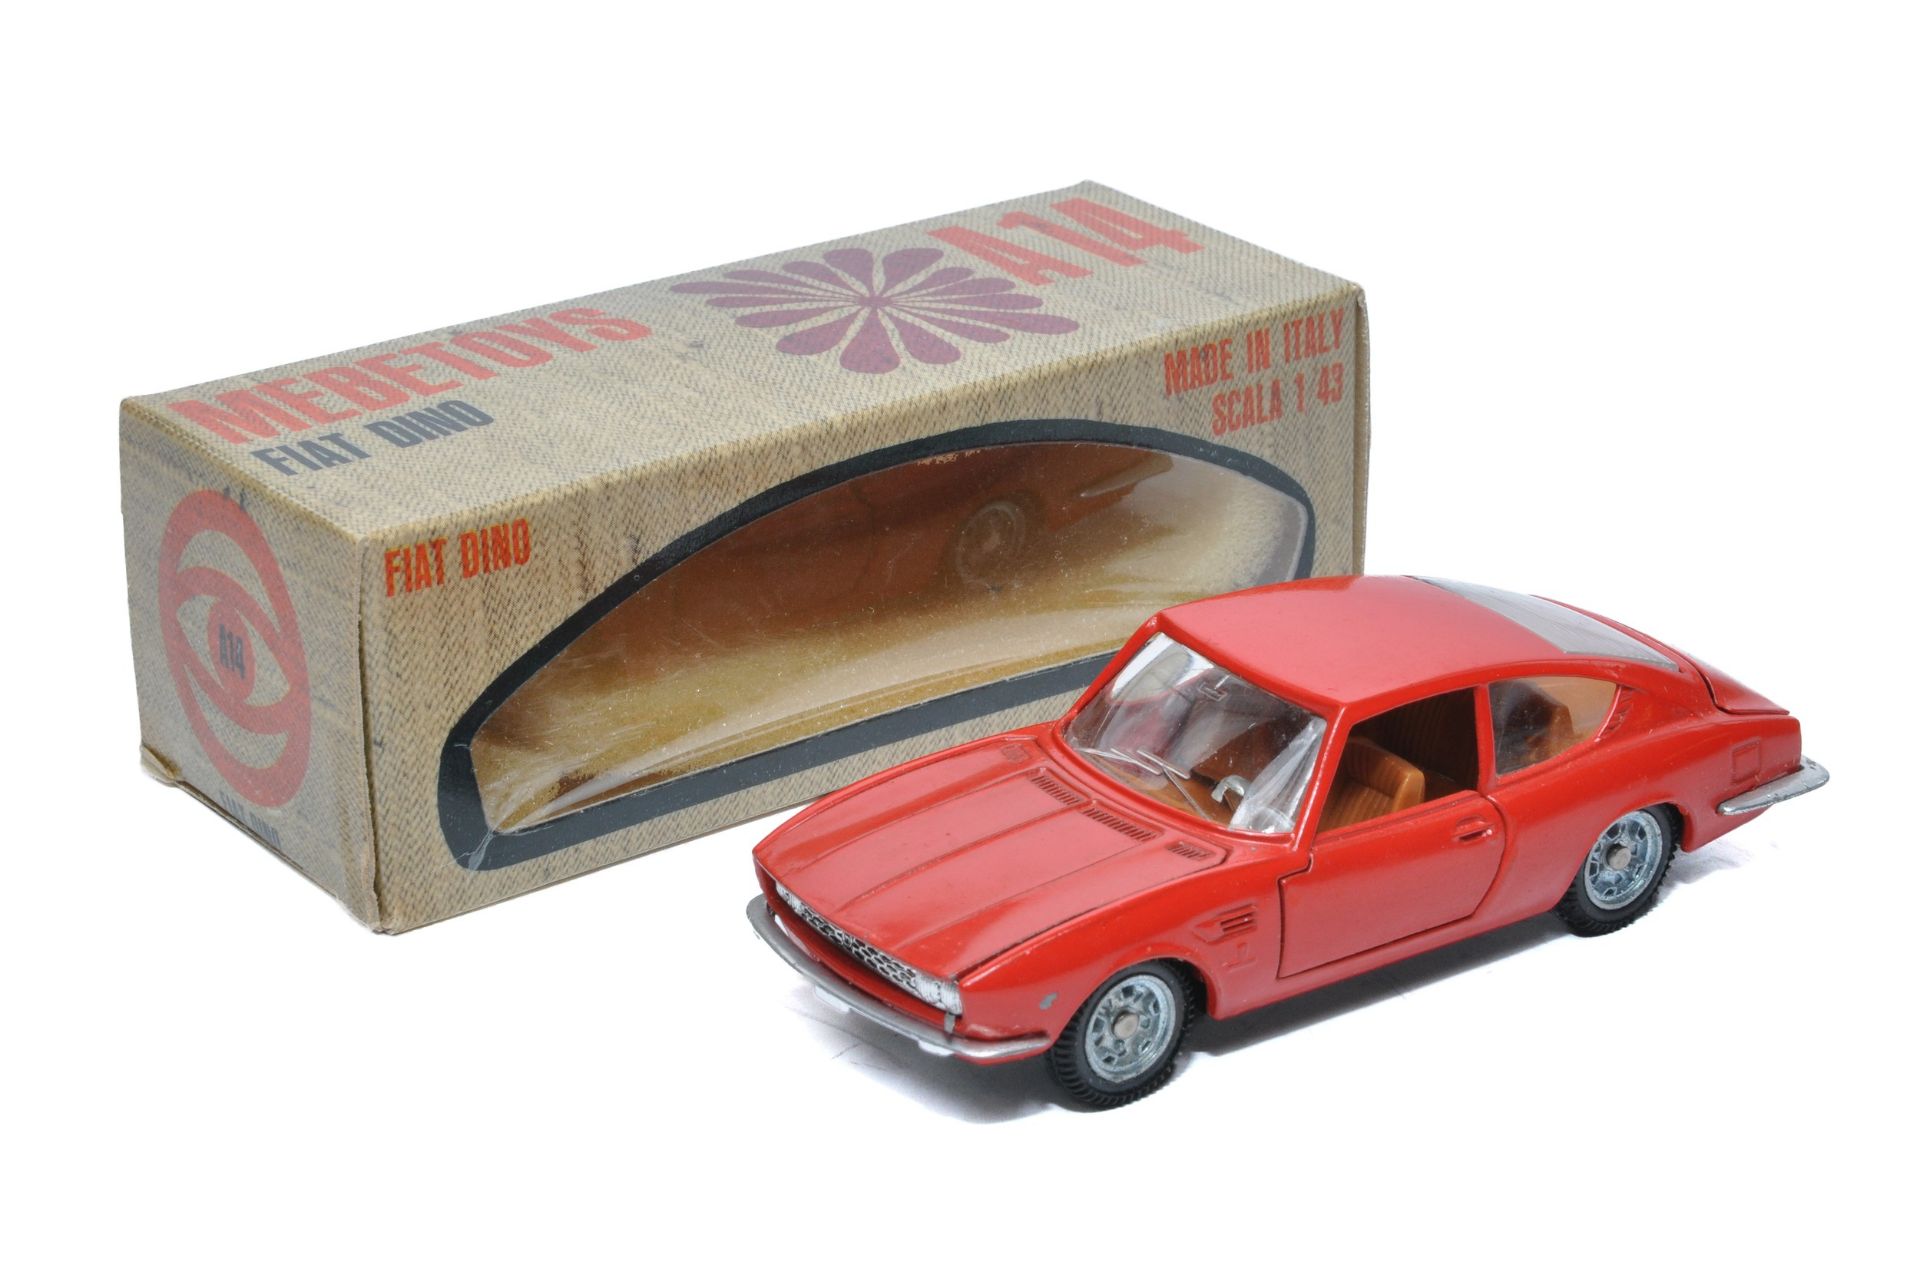 Mebetoys No. A14 Fiat Dino Coupe. Red with brown interior. Displays excellent, the odd speck of